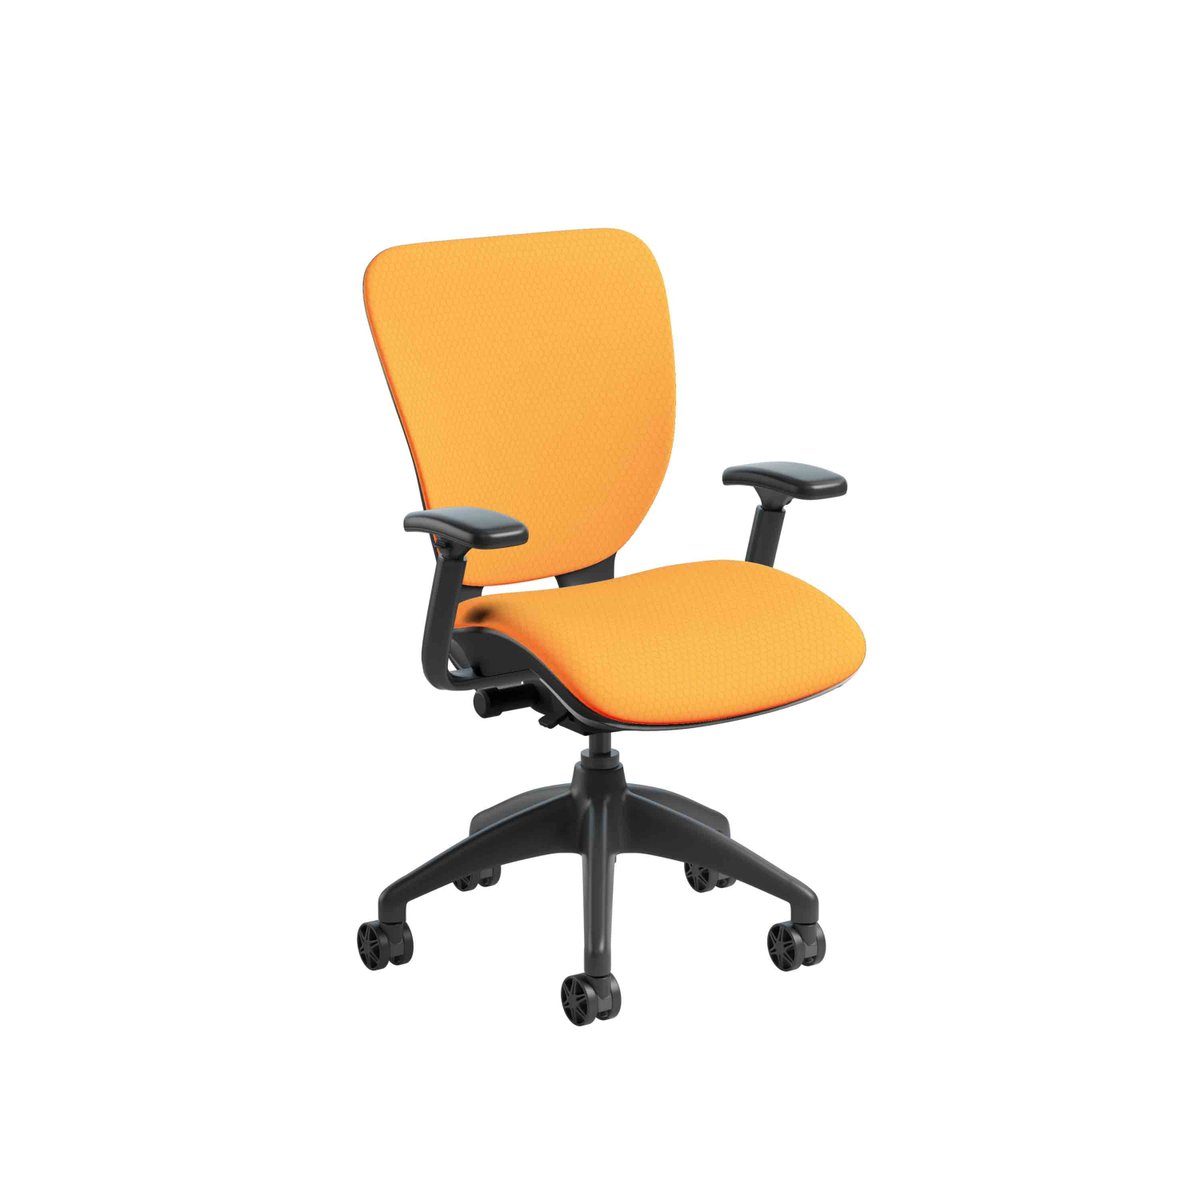 Nightingale Chairs On Twitter Wxo Less Fuss More Focus